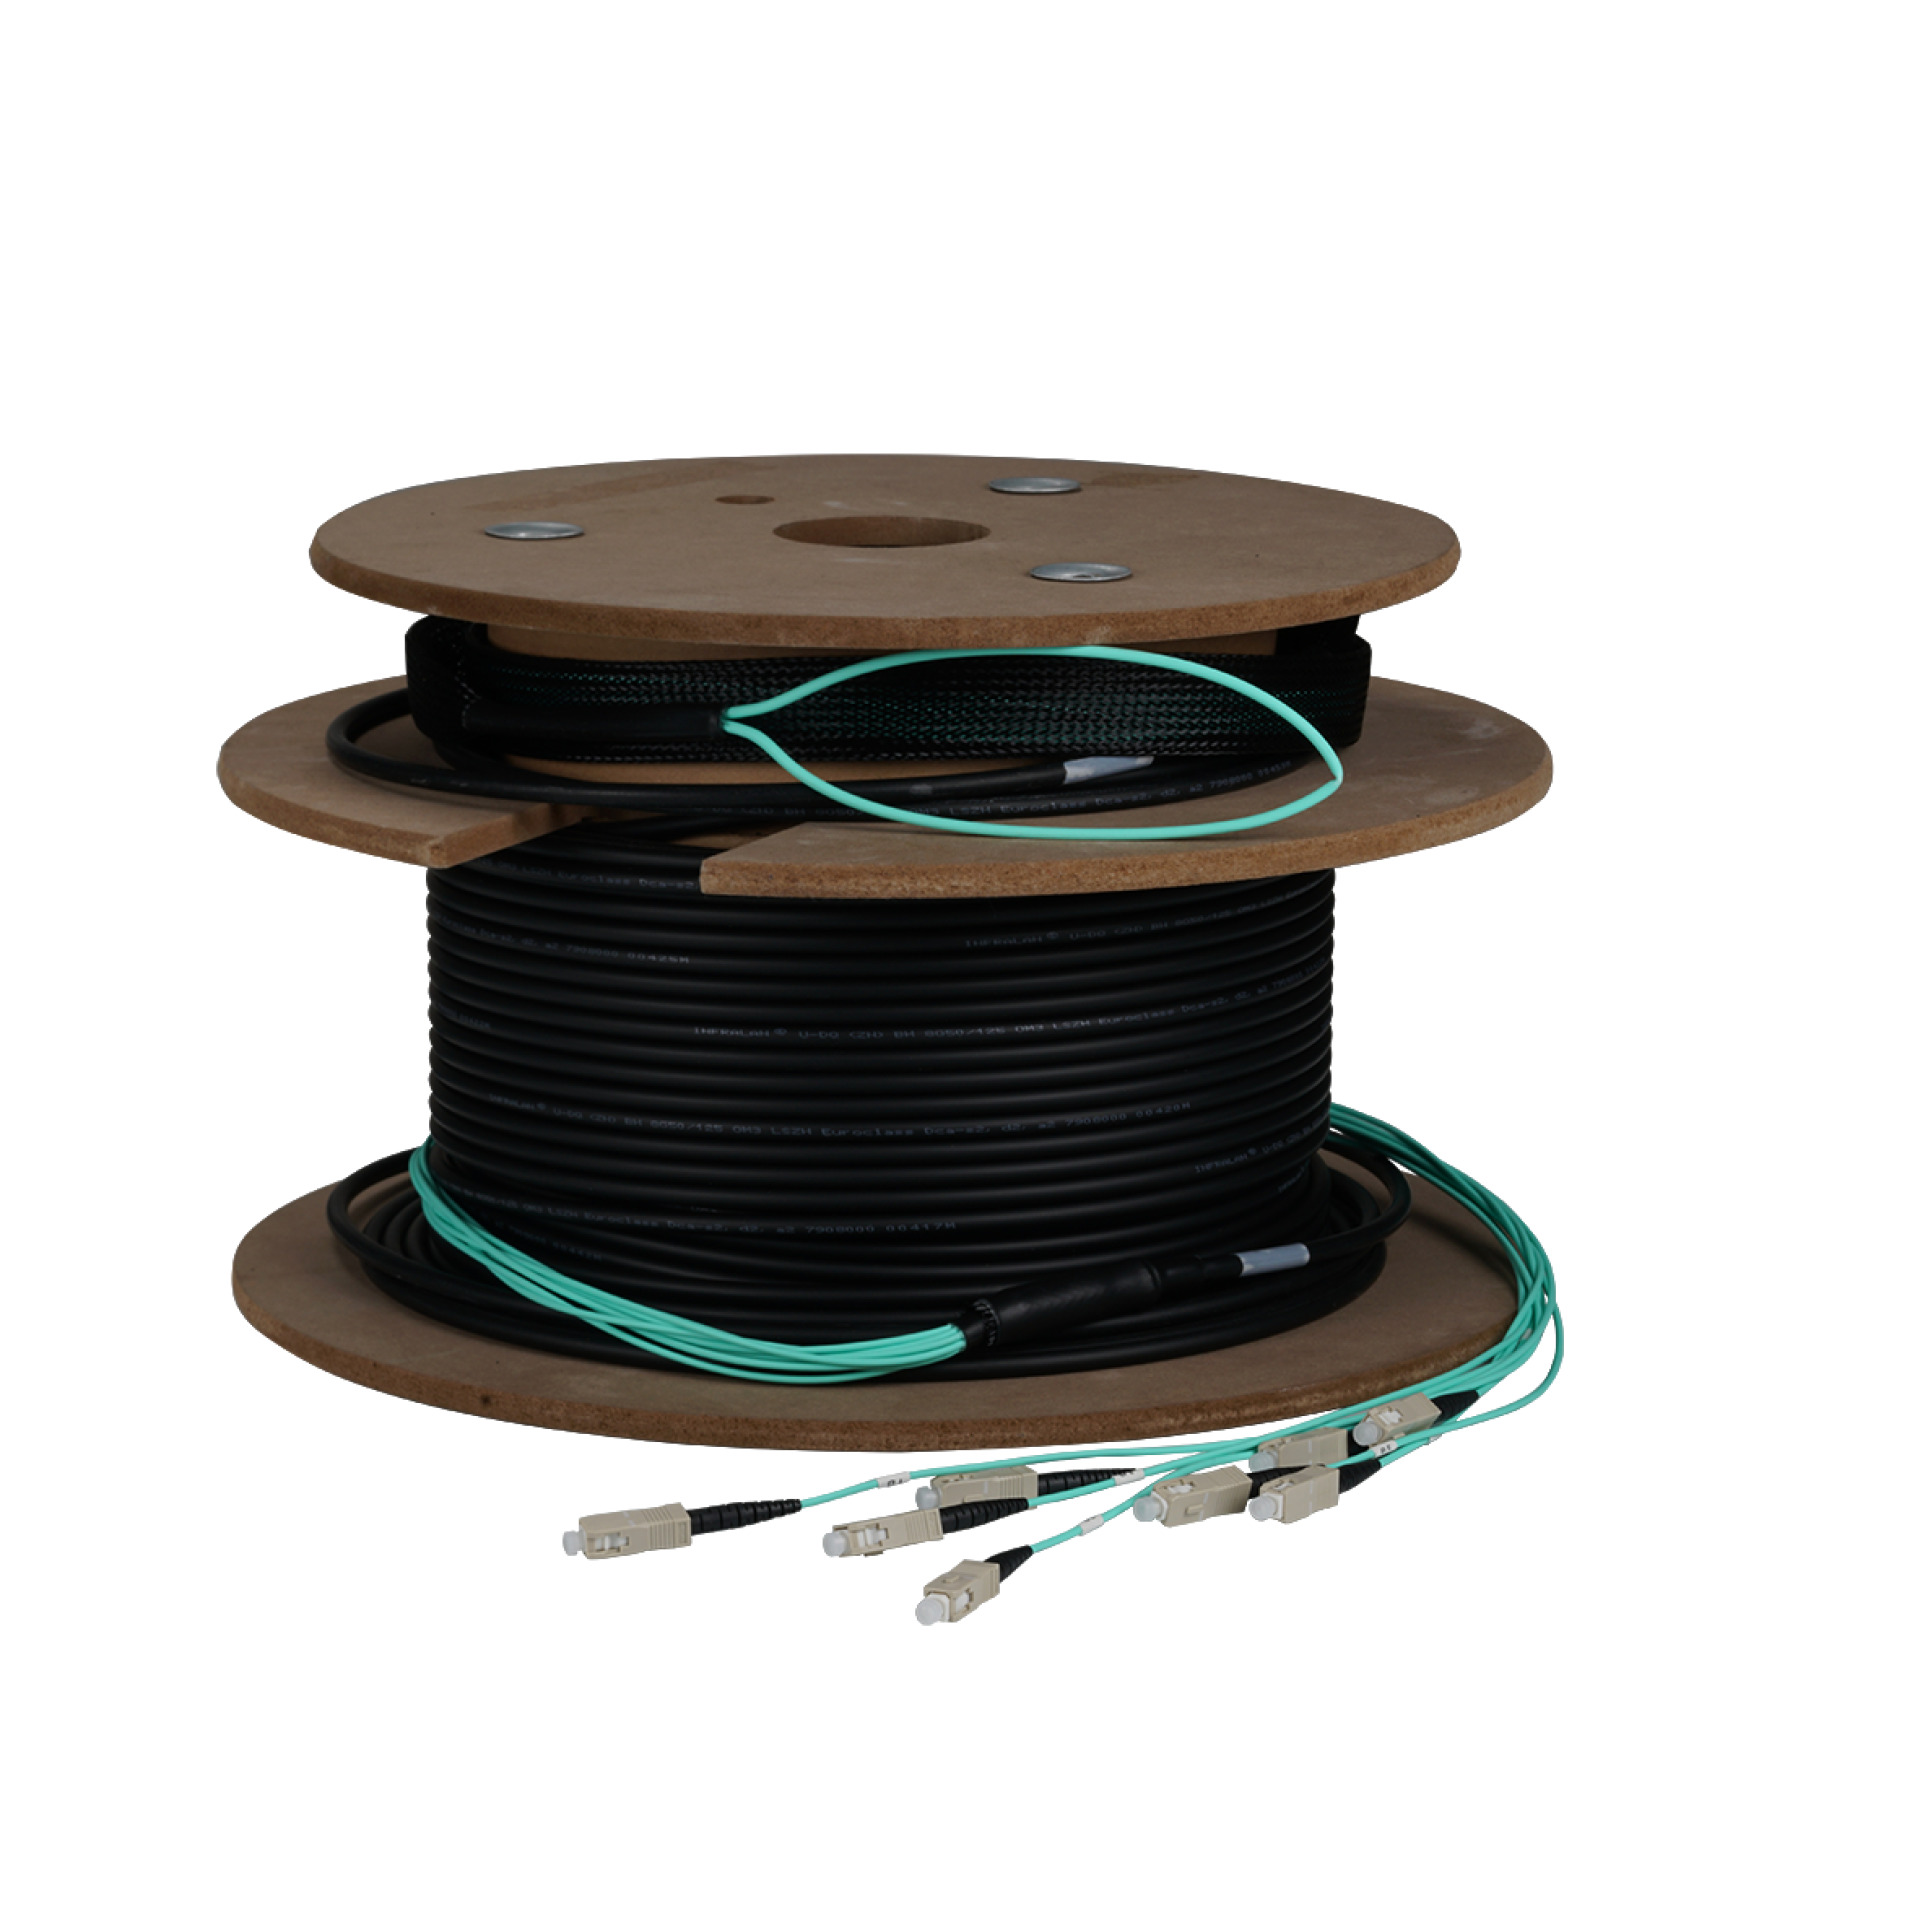 Trunk cable U-DQ(ZN)BH 8G 50/125, SC/SC OM3 100m